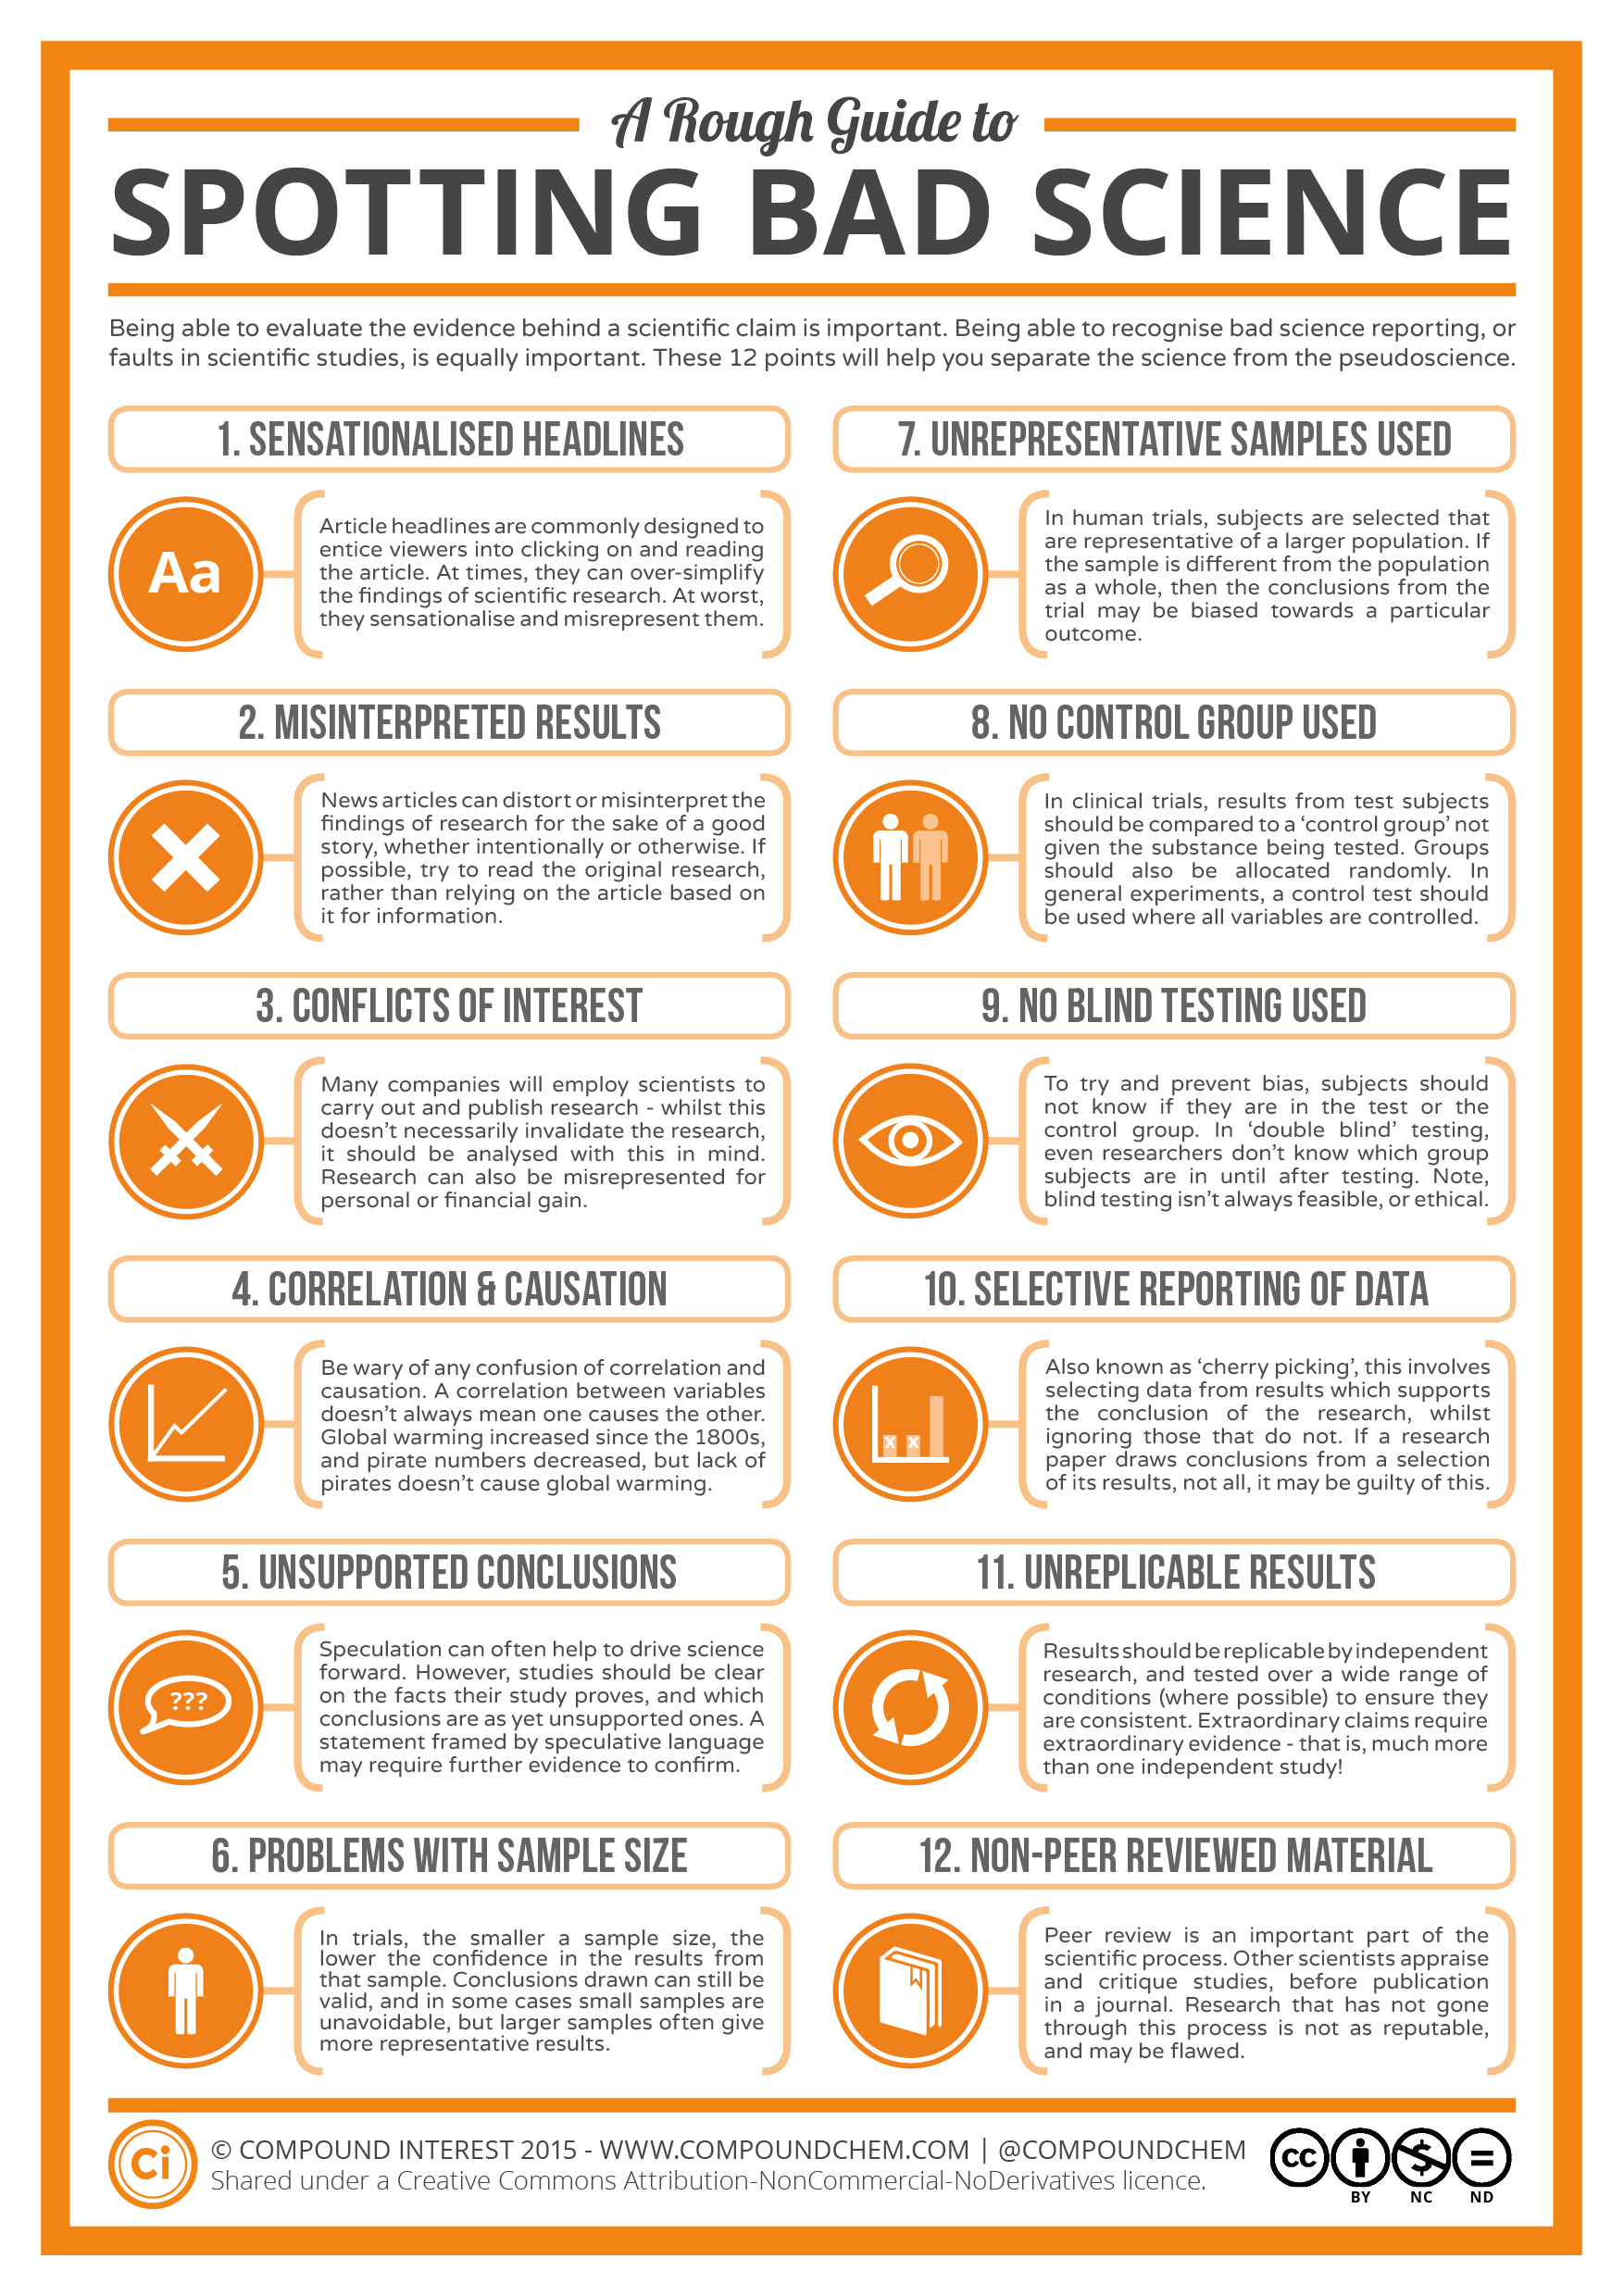 A guide to spotting bad science